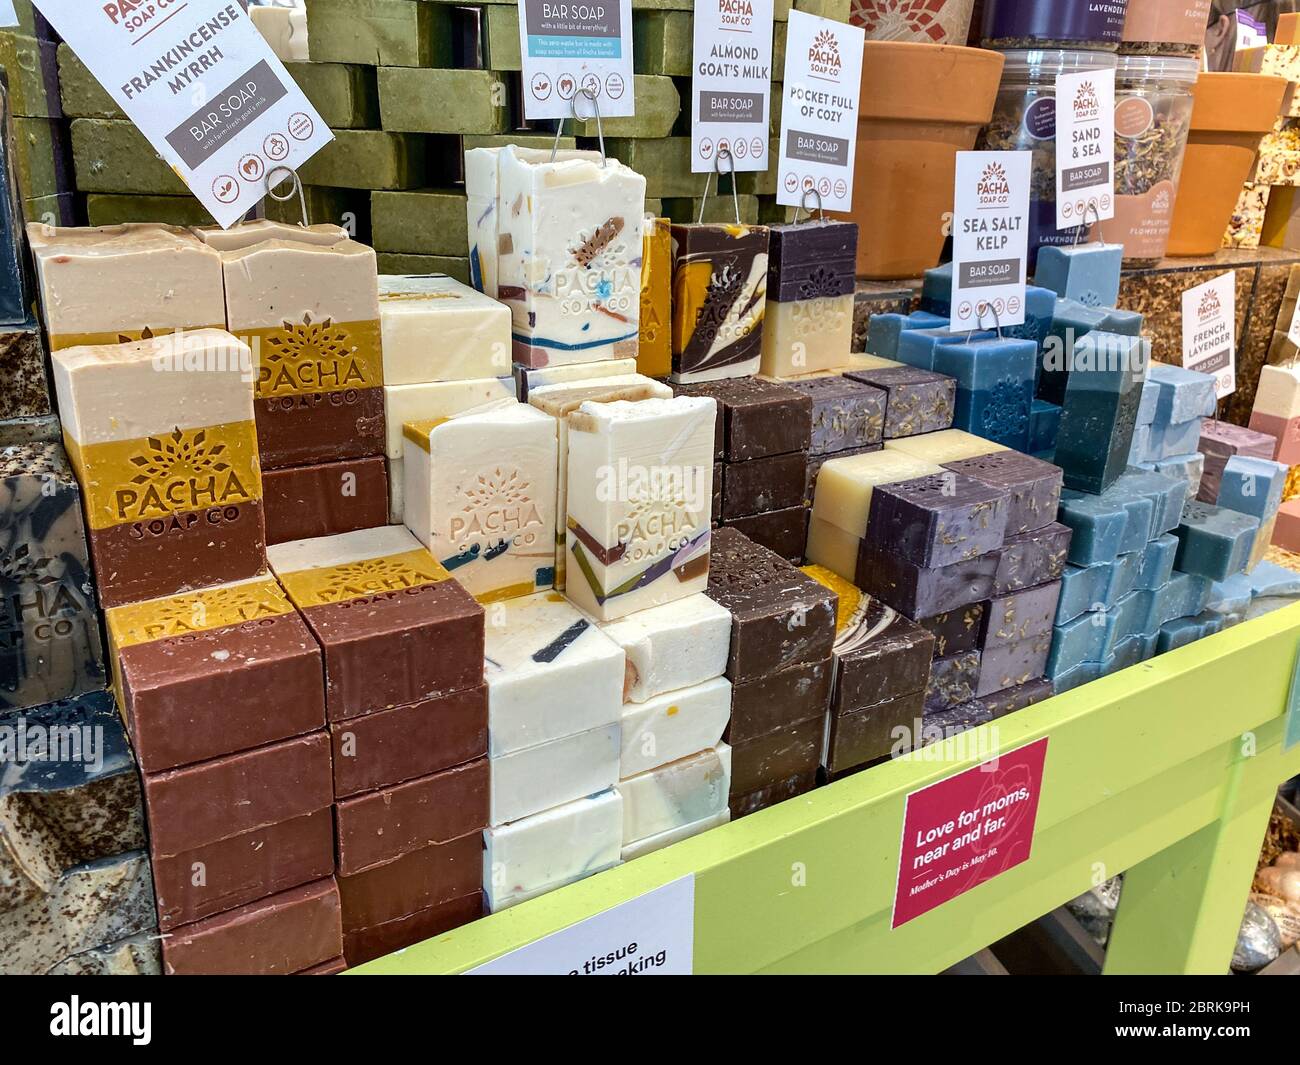 https://c8.alamy.com/comp/2BRK9PH/orlando-flusa-51020-a-display-of-pacha-soap-co-luxury-soap-at-a-whole-foods-market-grocery-store-2BRK9PH.jpg